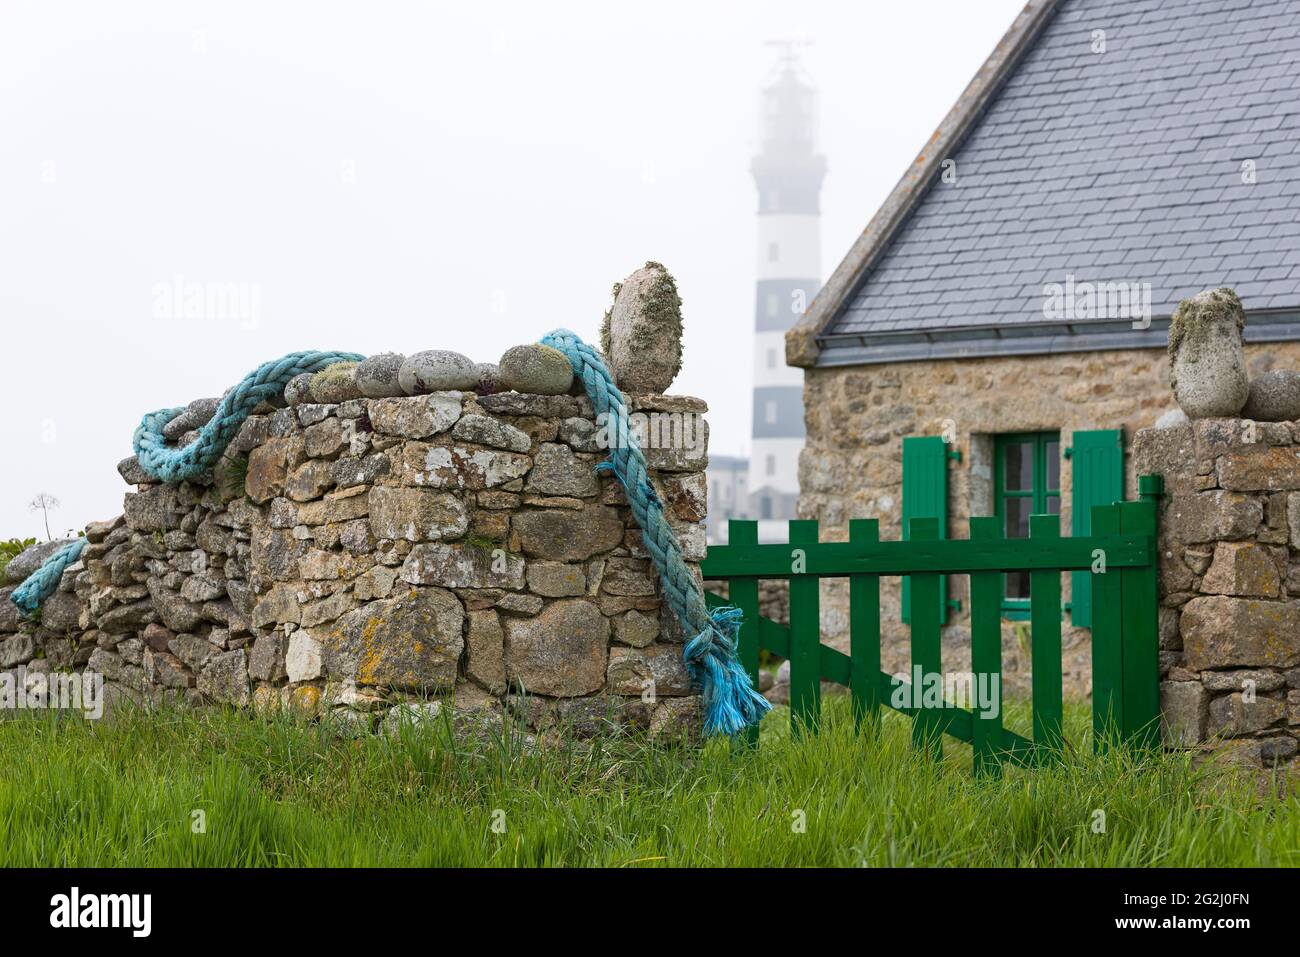 House and stone wall, in the background the lighthouse Créac'h, foggy mood, Île d´Ouessant, France, Brittany, Finistère department Stock Photo